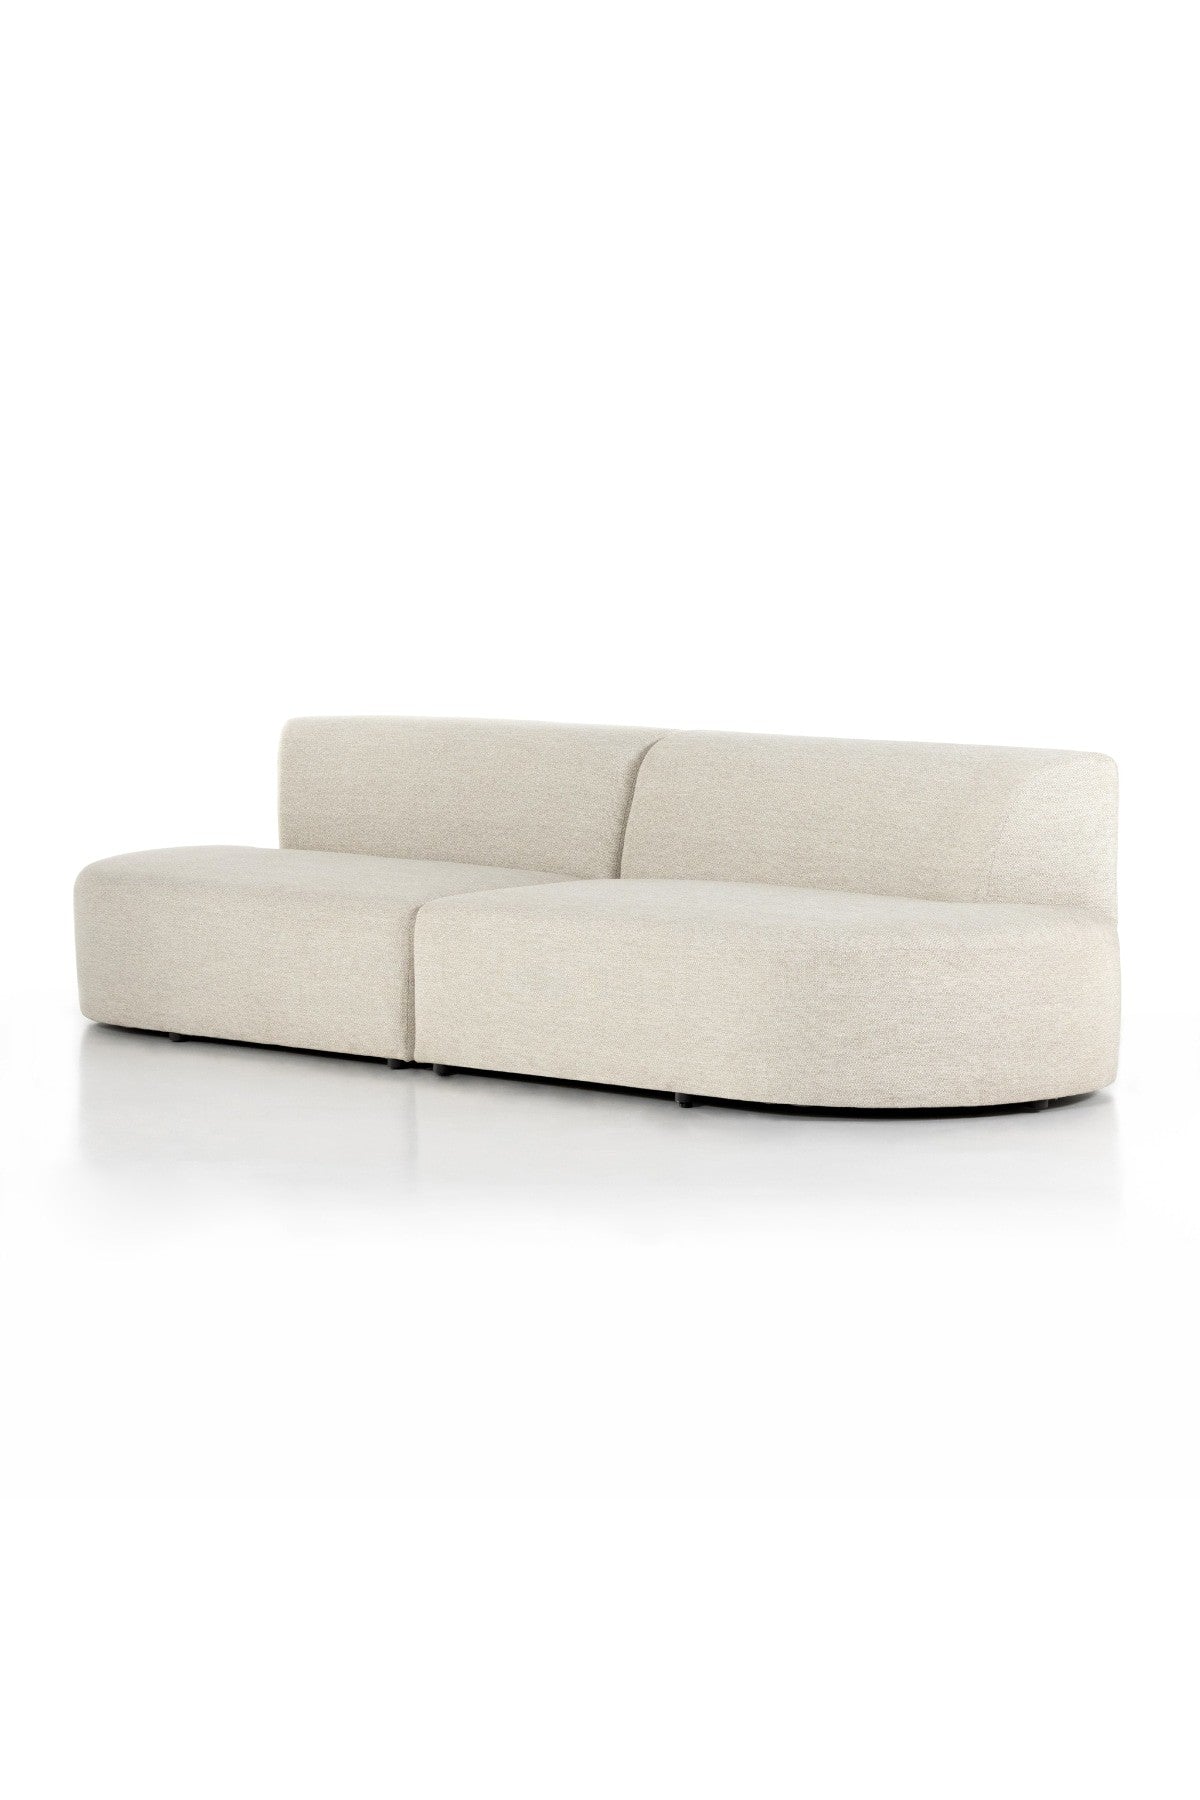 Orion Outdoor Sectional